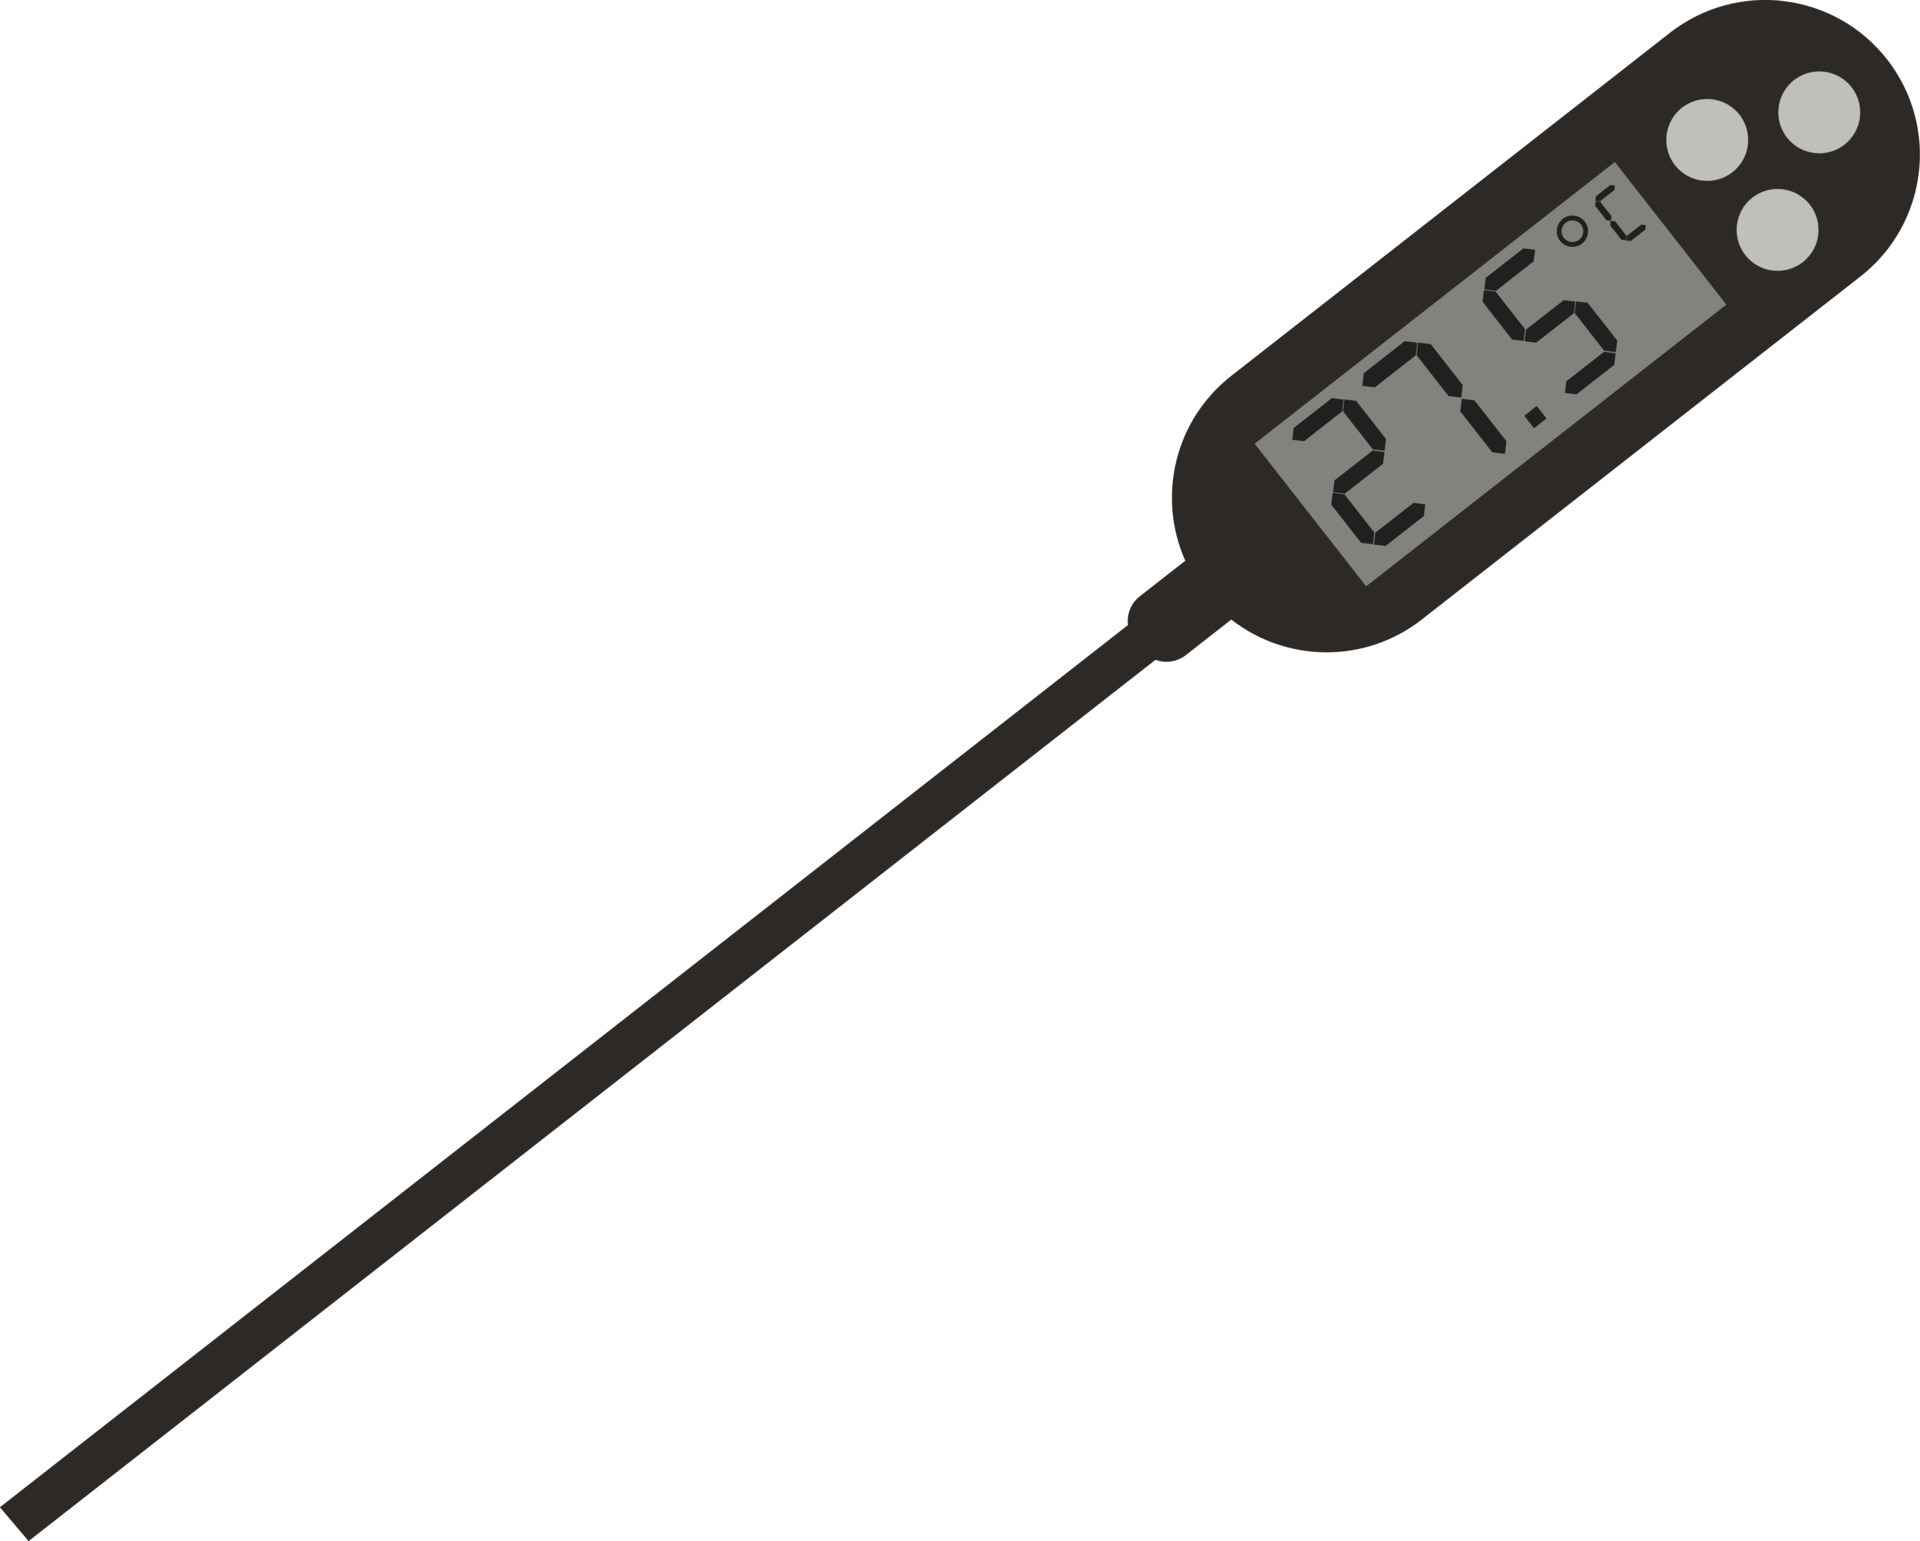 https://static.vecteezy.com/system/resources/previews/023/880/744/original/kitchen-thermometer-icon-on-white-background-laboratory-thermometer-food-temperature-flat-style-vector.jpg